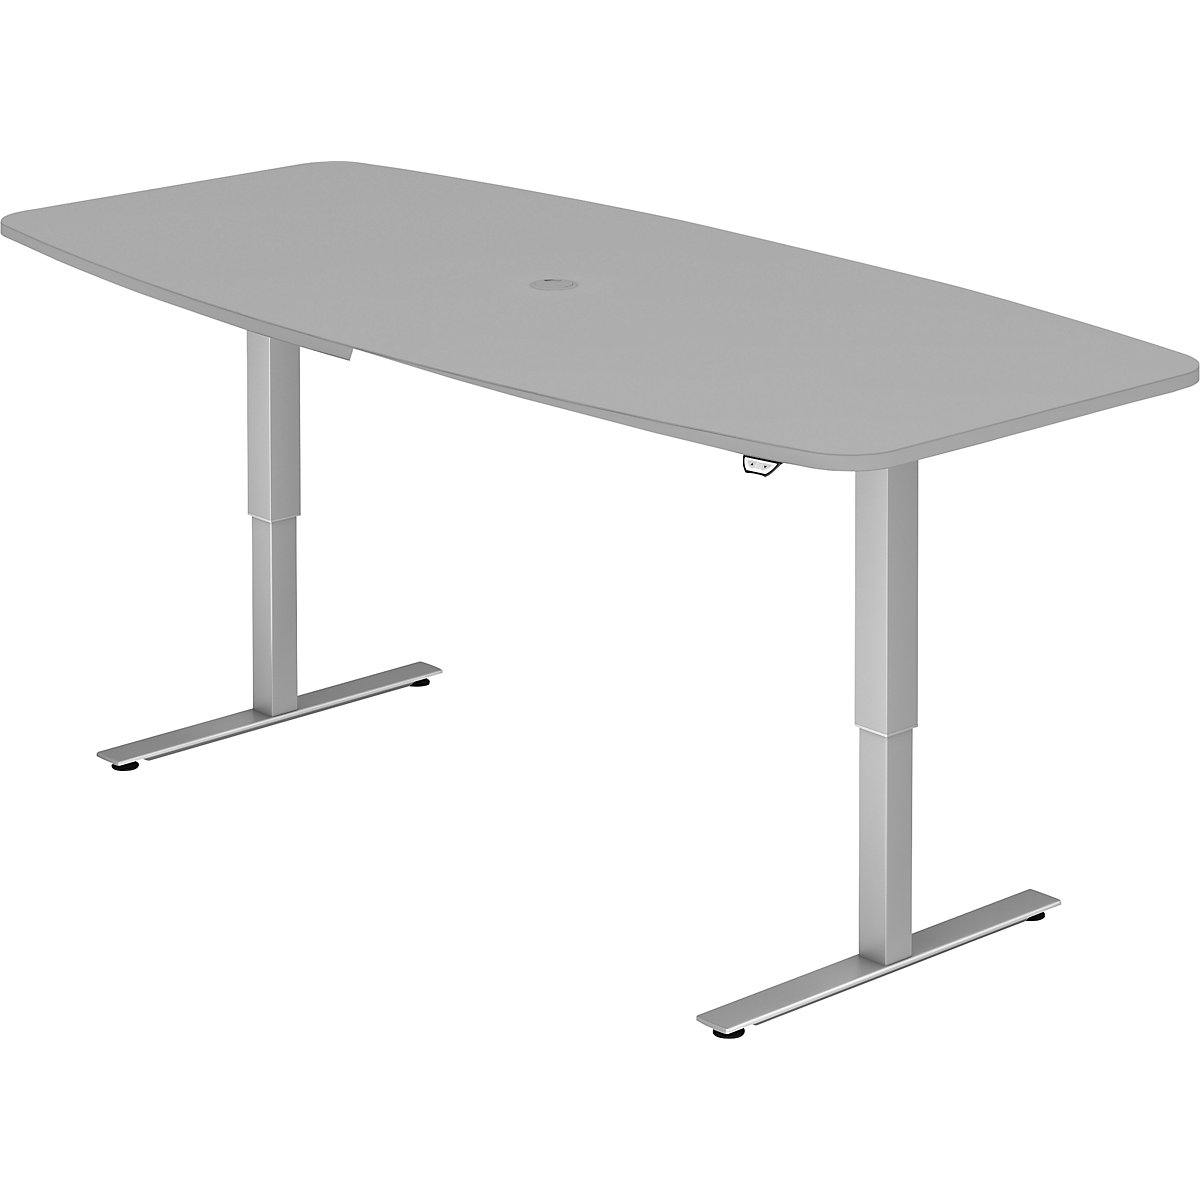 Conference table, WxD 2200 x 1030 mm, electric height adjustment from 720 – 1190 mm, light grey-5